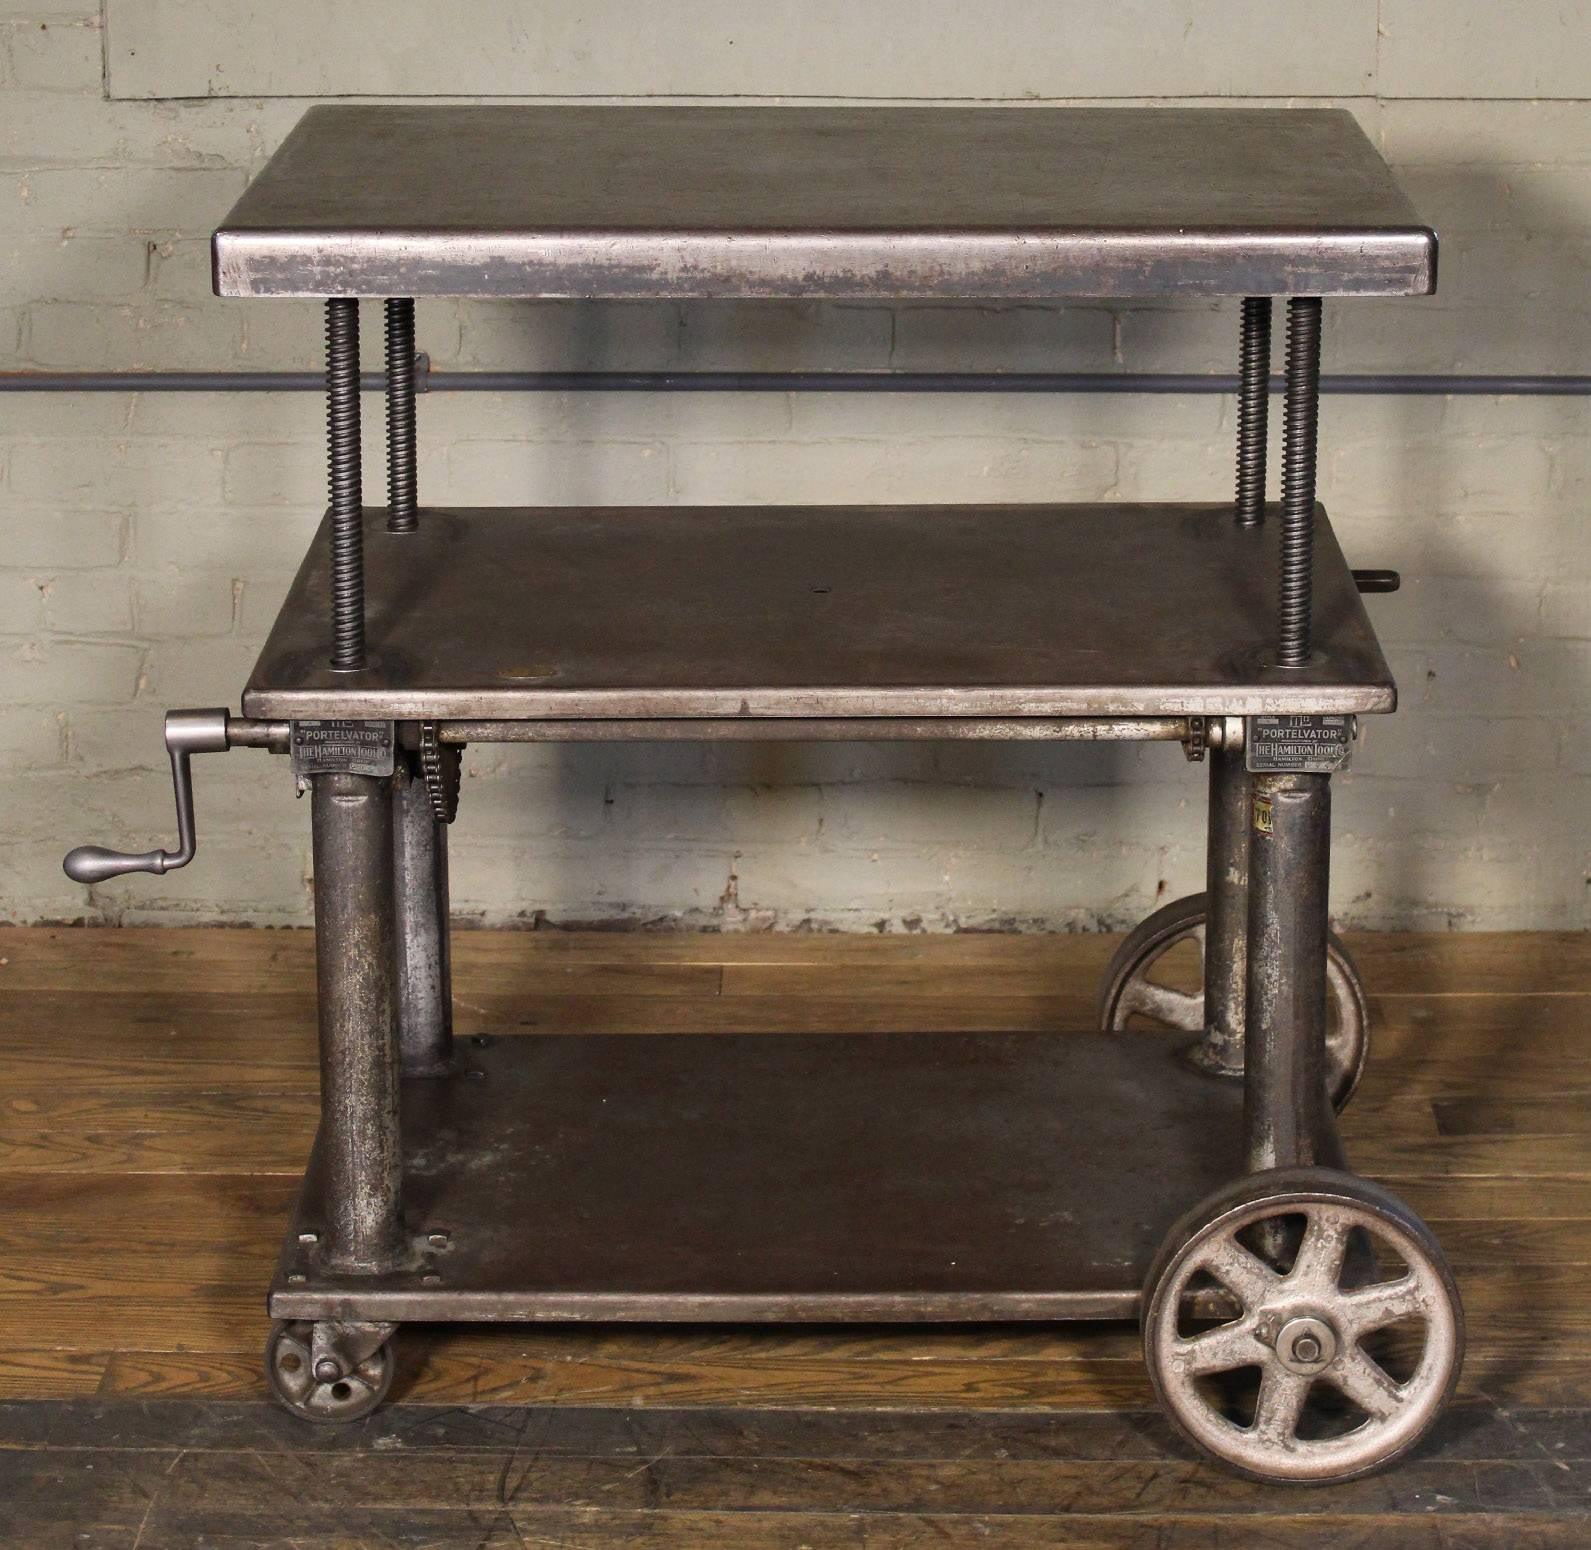 Original vintage Industrial adjustable metal, steel rolling three tier lift bar cart / table with cast iron casters / wheels. Measure: Top is adjustable in height from 25 1/4" - 41 1/2". Top measures 34" x 22". Shelf heights